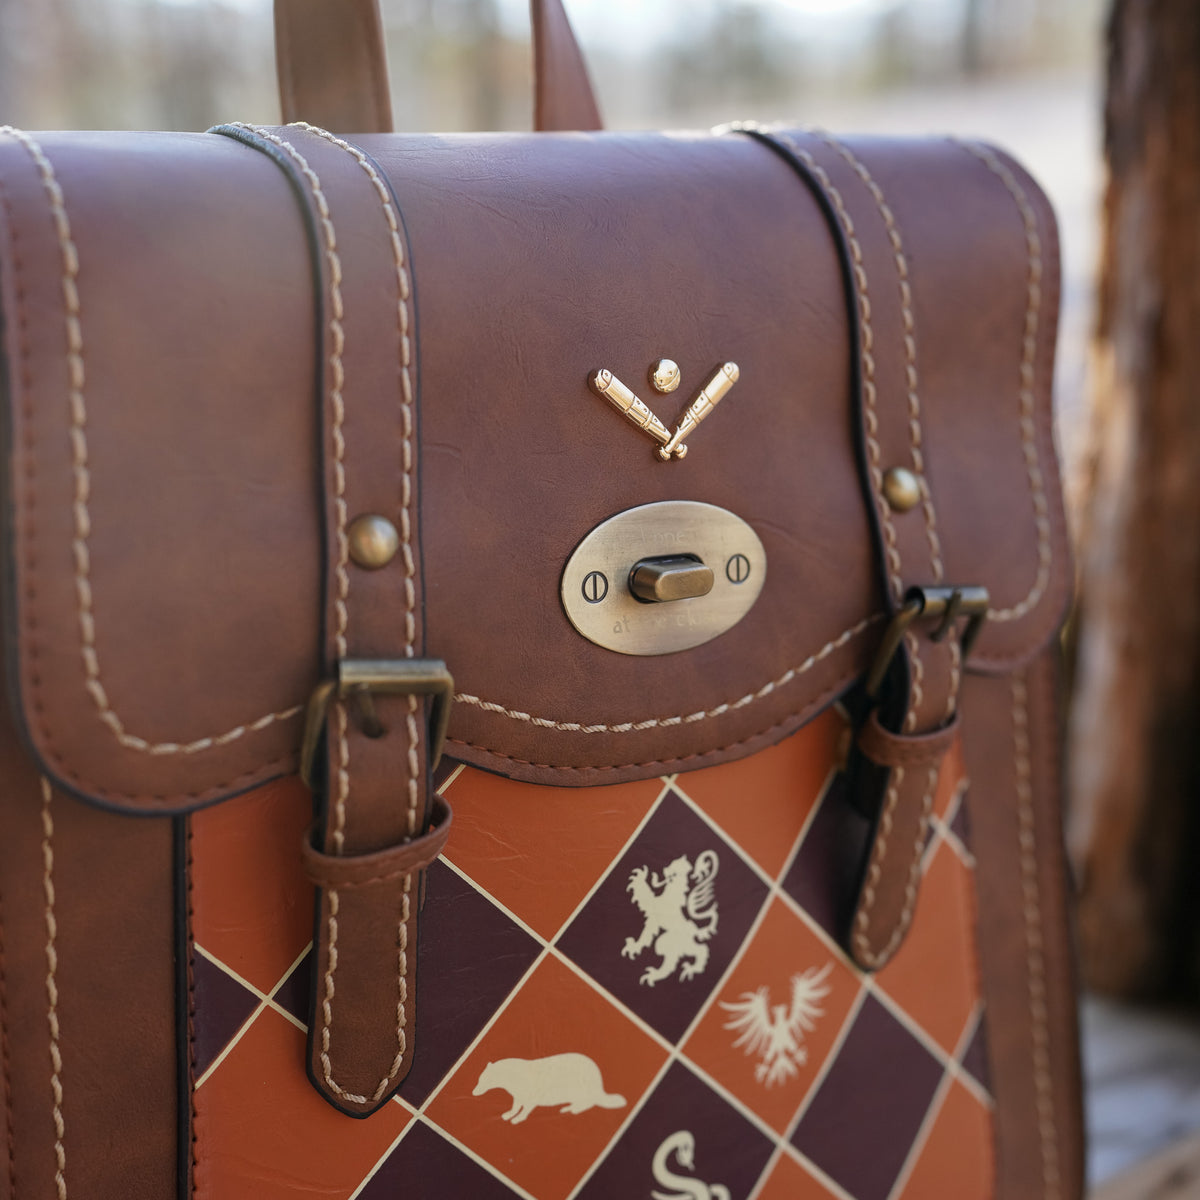 Magical Sports Backpack is made of brown leather, orange and maroon checkers and gold details